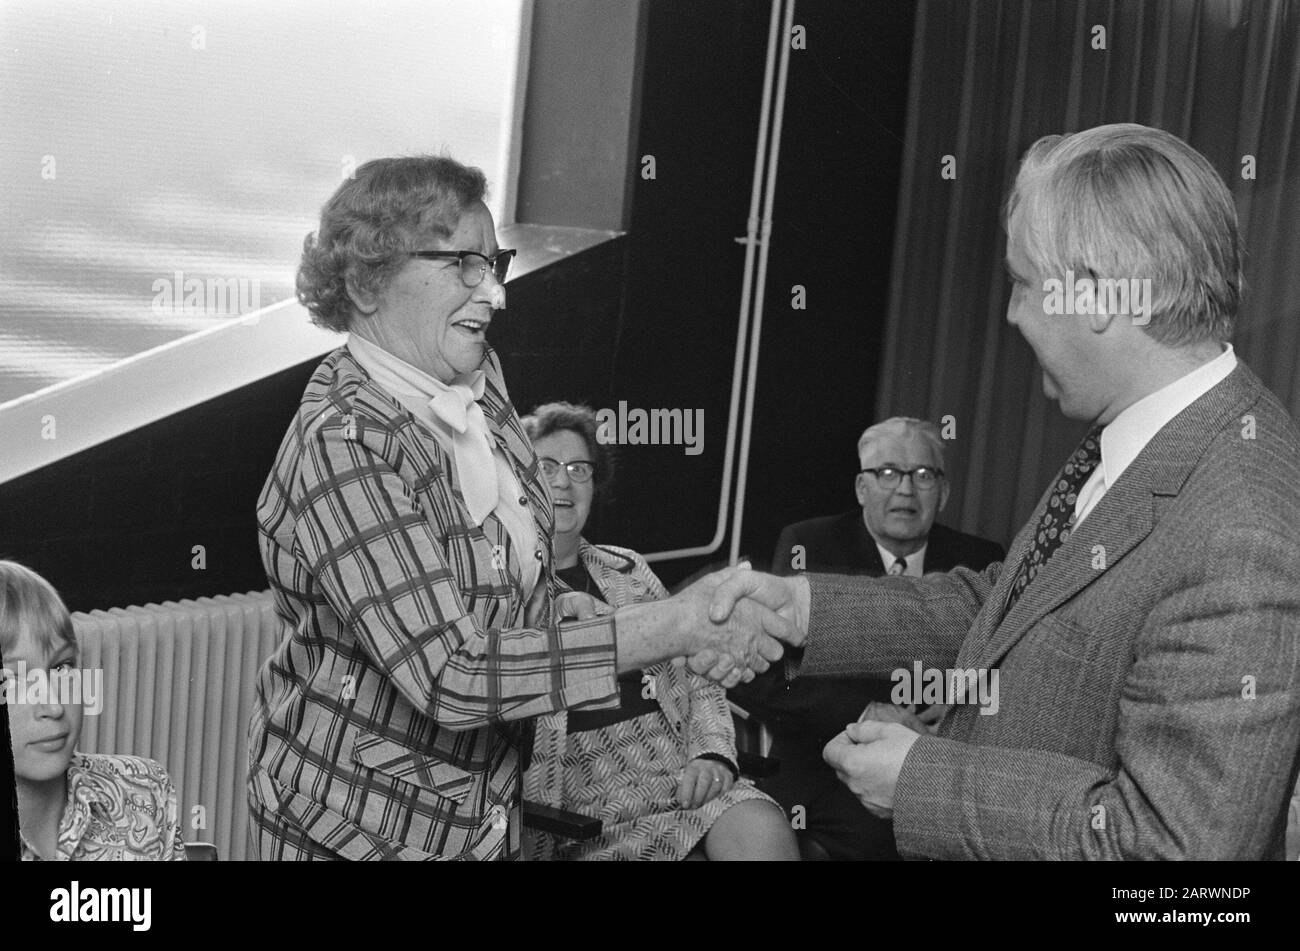 Aunt Mart Stroop, who helped Jews in the war, honoured at Jewish Cultural Centre in Amsterdam Date: September 25, 1973 Location: Amsterdam, Noord-Holland Keywords: tributions Stock Photo